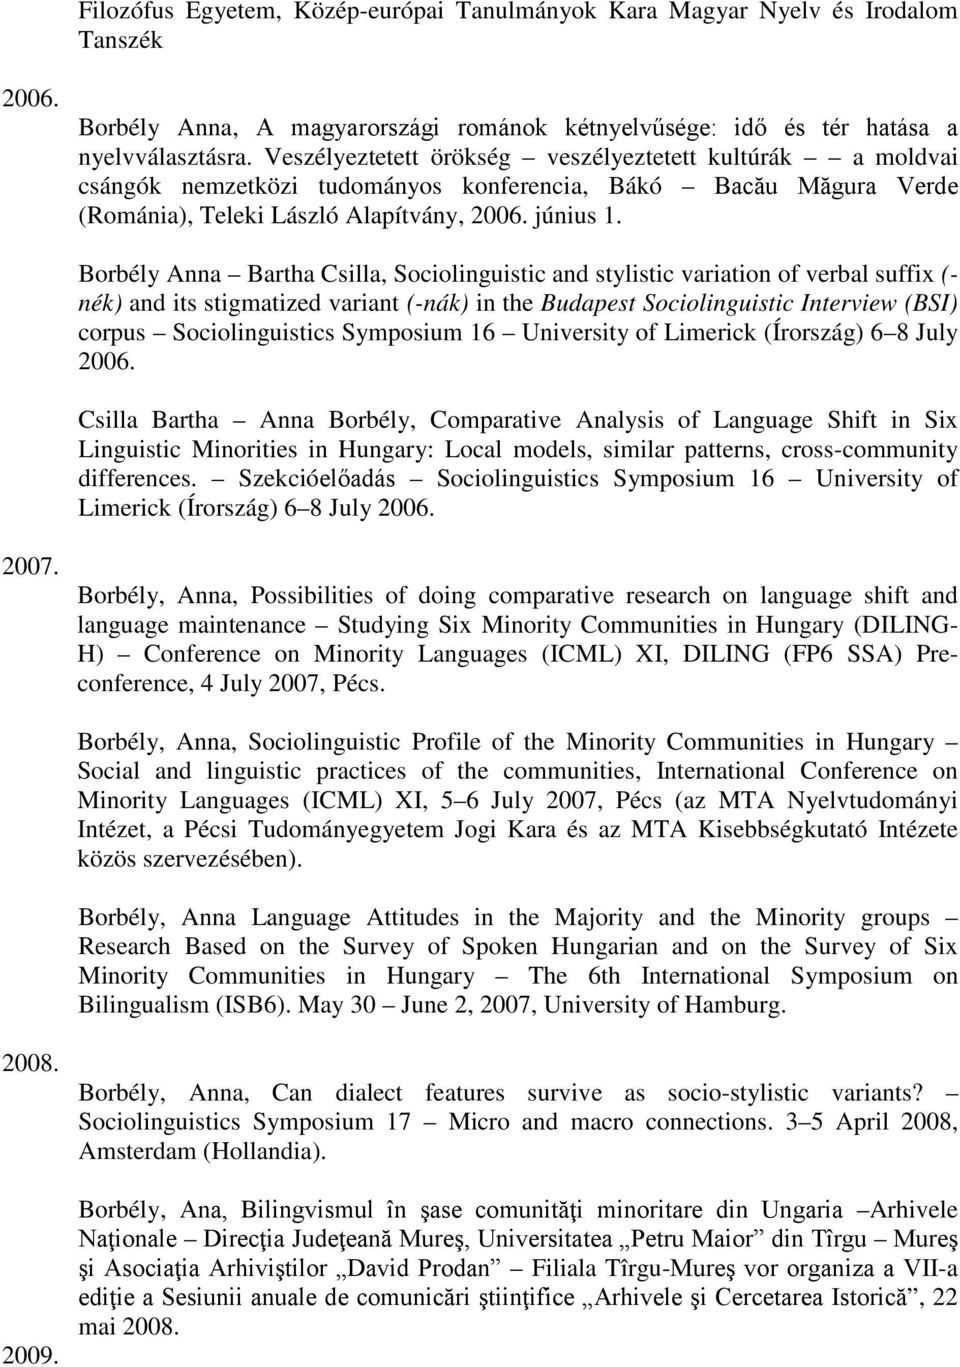 Borbély Anna Bartha Csilla, Sociolinguistic and stylistic variation of verbal suffix (- nék) and its stigmatized variant (-nák) in the Budapest Sociolinguistic Interview (BSI) corpus Sociolinguistics